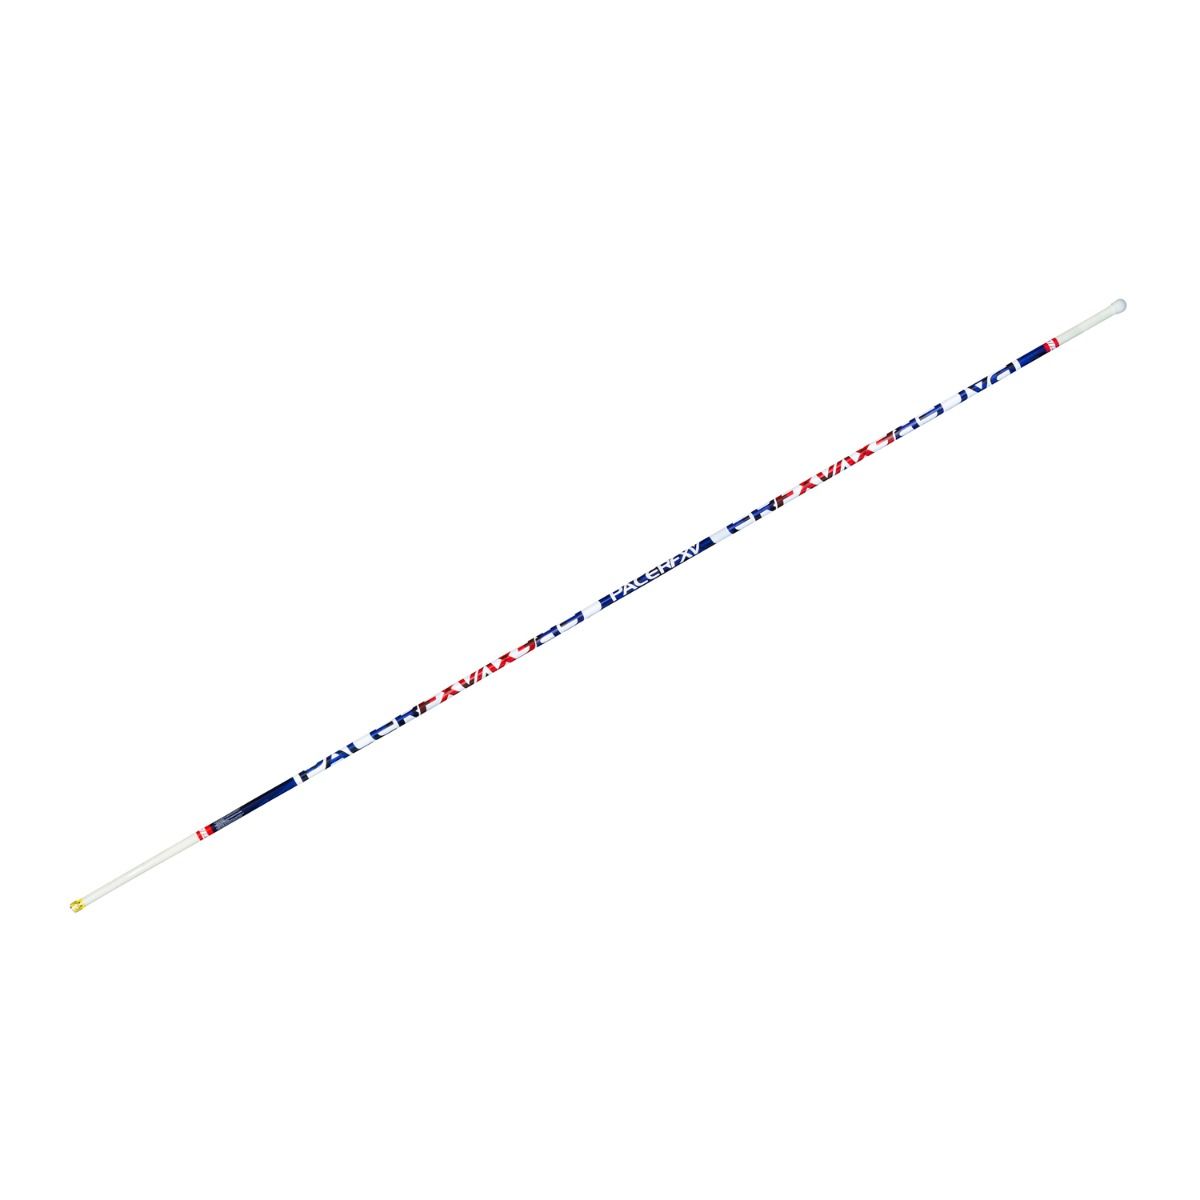 Gill PacerFXV 16' 9" Vaulting Pole